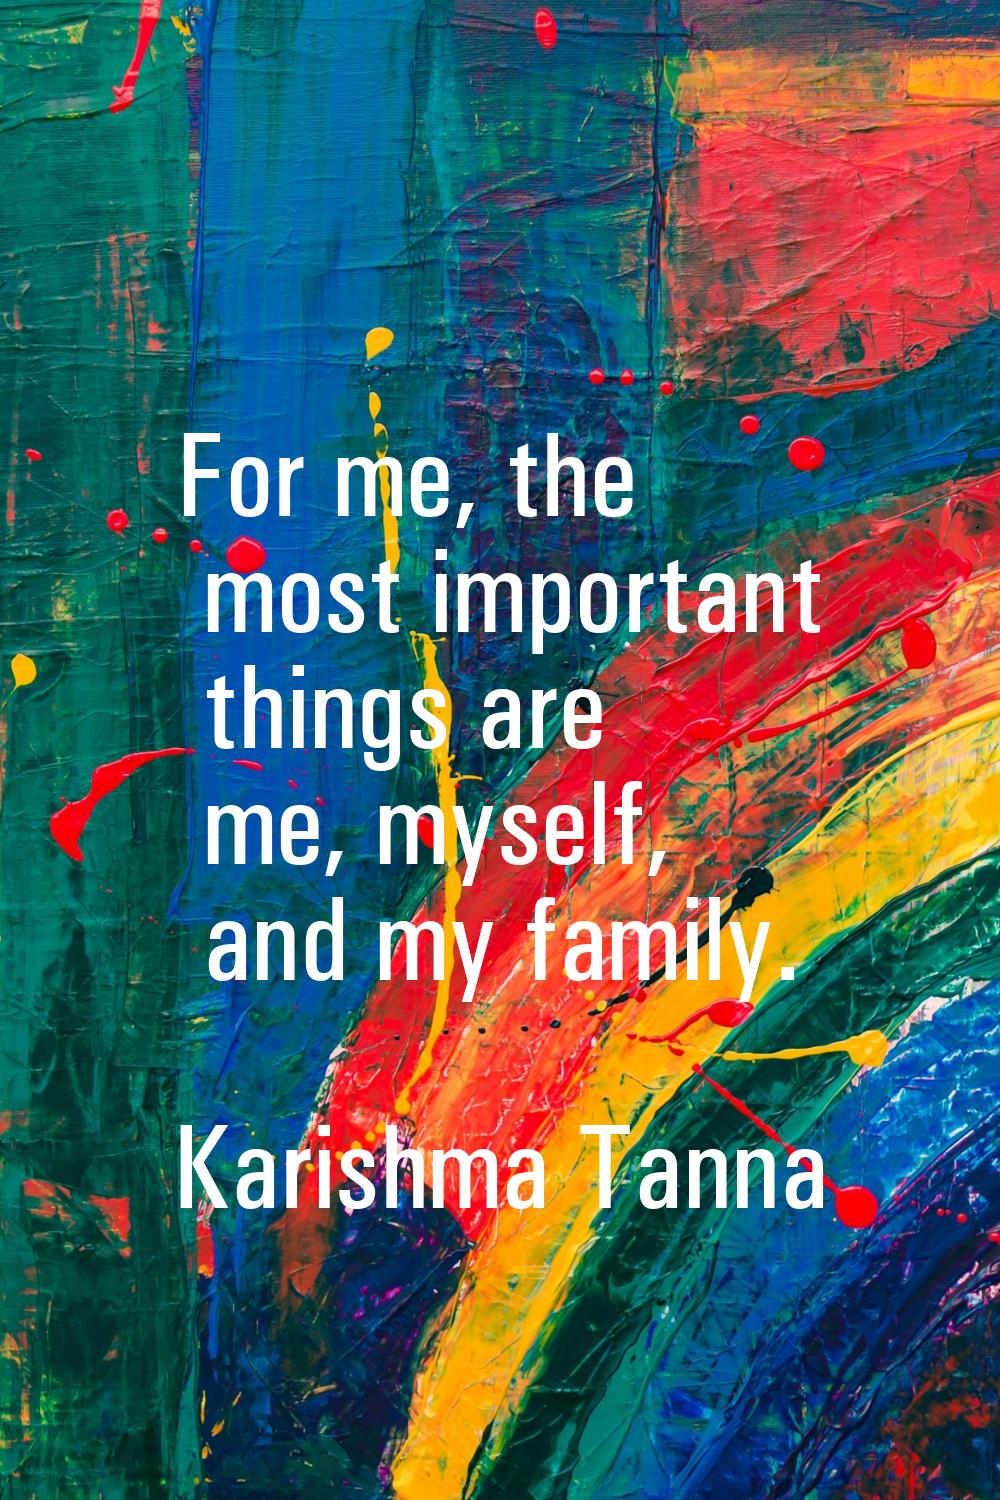 For me, the most important things are me, myself, and my family.